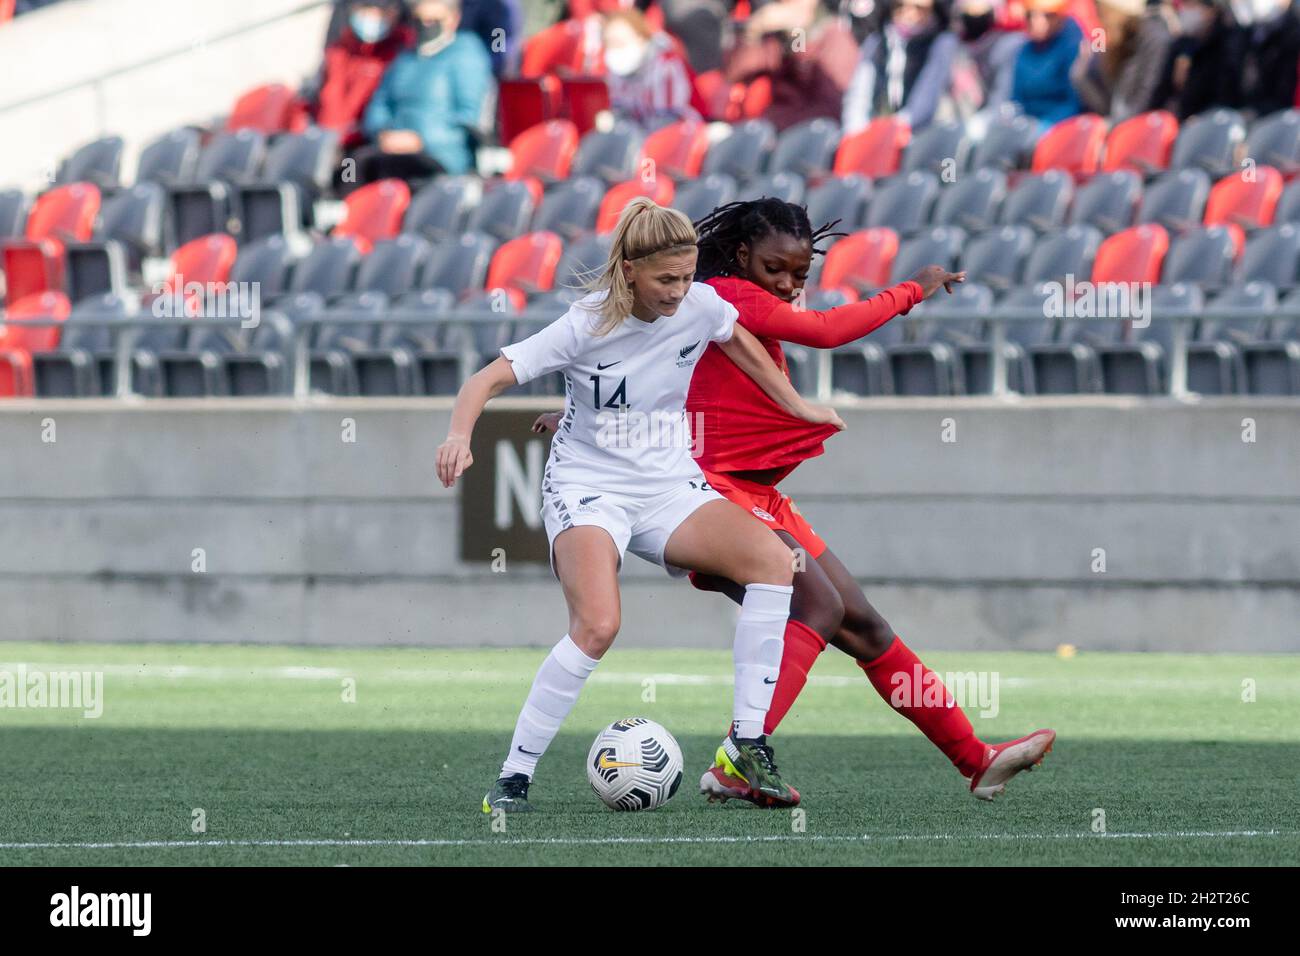 Ottawa, Canada, October 23, 2021: Katie Bowen (left) of Team New Zealand compete for the ball against Deanne Rose (right) of Team Canada during the Celebration Tour match at TD Place in Ottawa, Canada. Canada won the match 5-1. Stock Photo